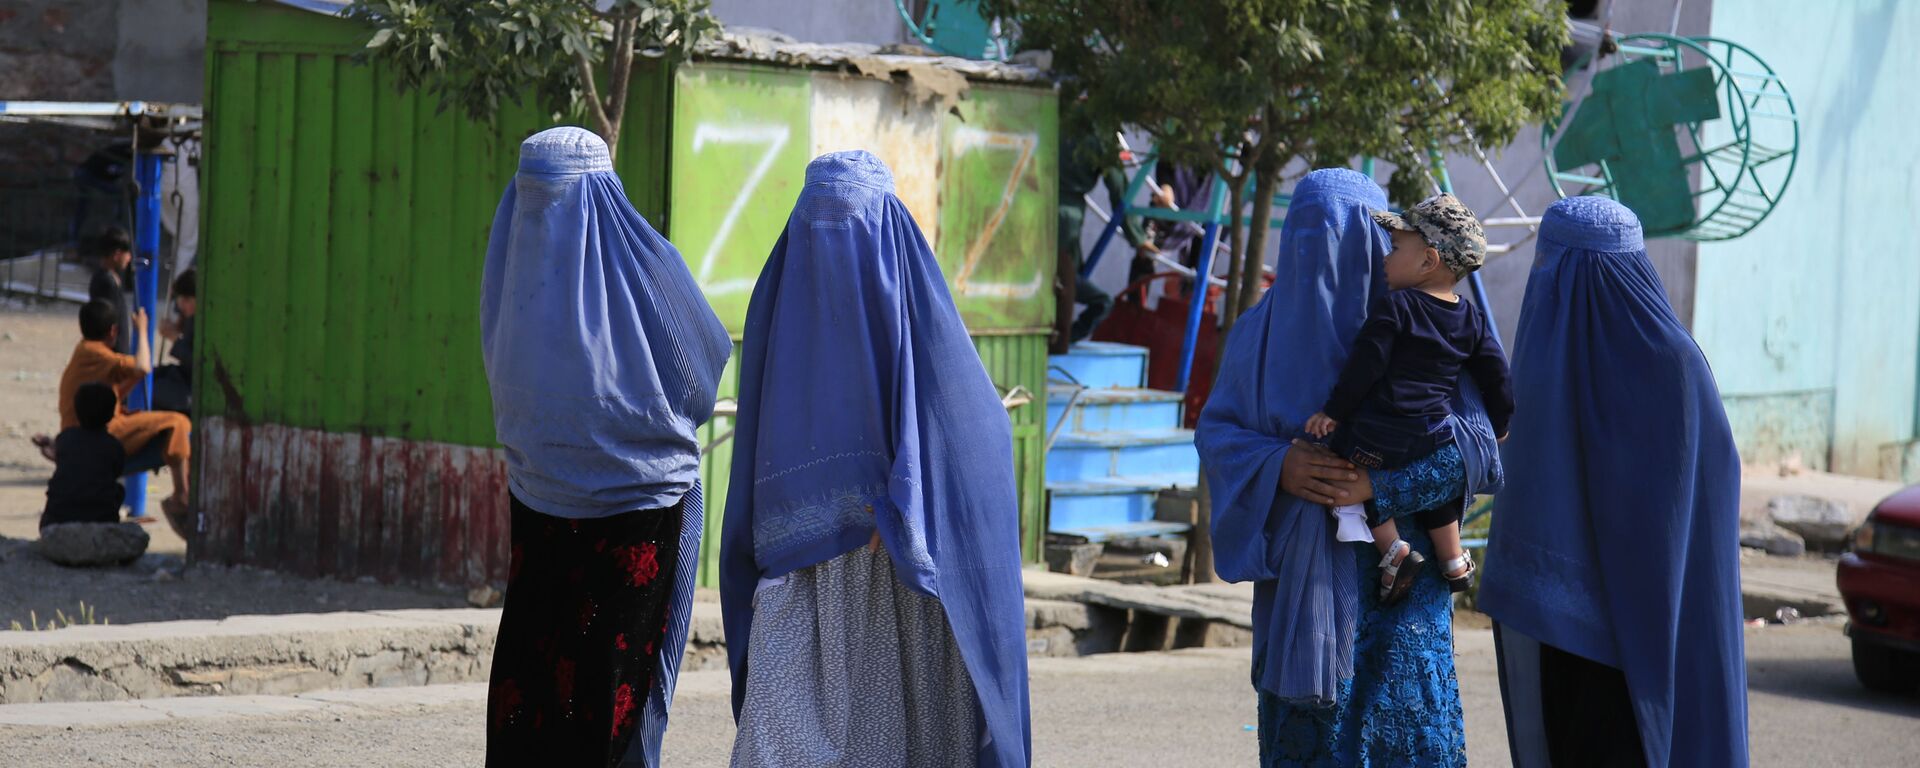 Afghan women walk on the road during the first day of Eid al-Fitr in Kabul, Afghanistan, Thursday, May 13, 2021 - Sputnik International, 1920, 17.08.2021